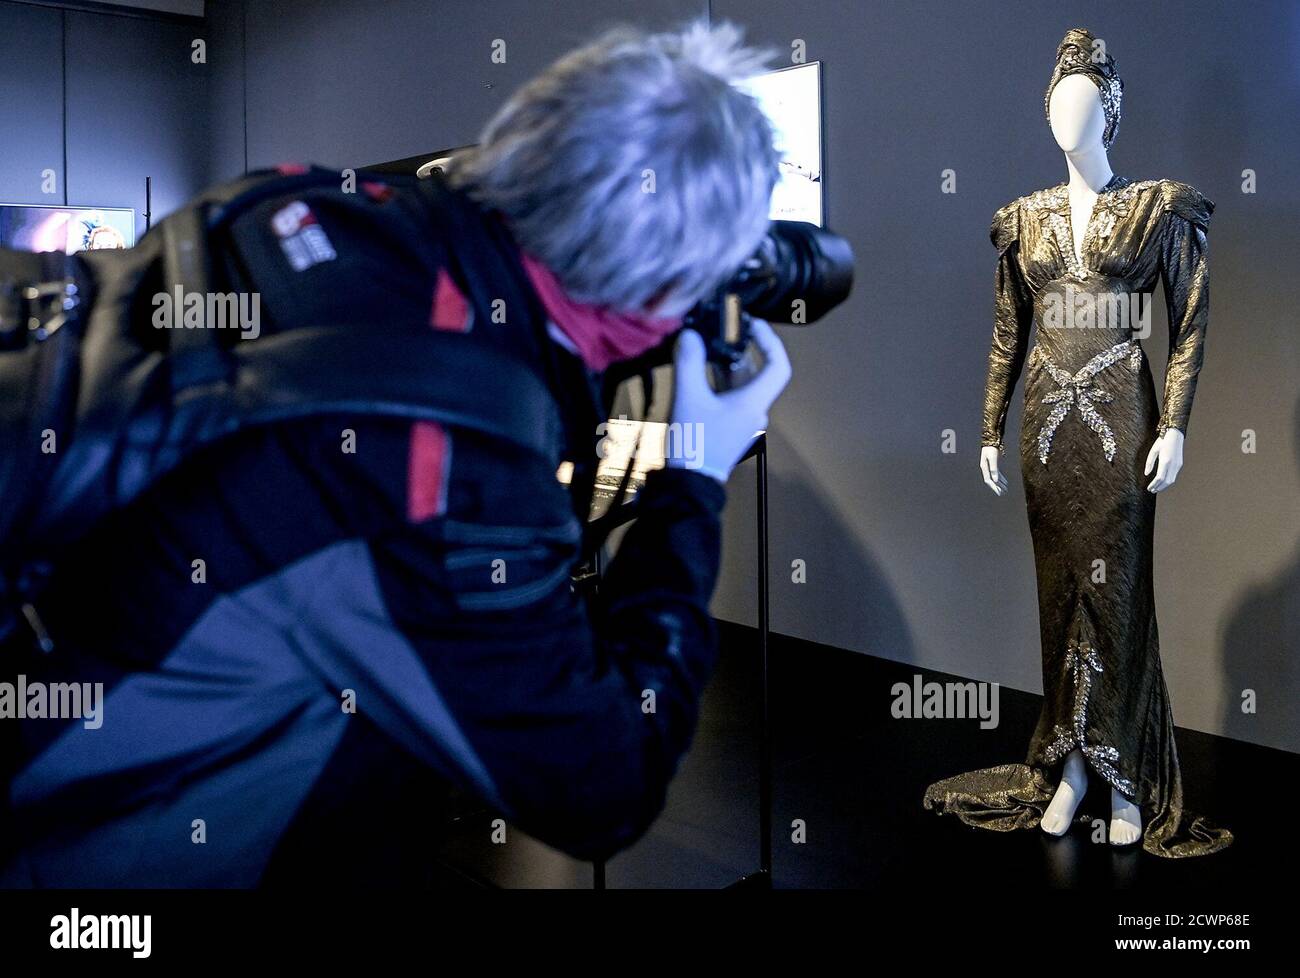 30 September 2020, Berlin: A visitor photographs the evening gown made of silver lamé from the film Lili Marleen by director Werner Fassbender for the actress Hanna Schygulla in the exhibition 'Hautnah. The Film Costumes of Barbara Baum' at the Deutsche Kinemathek - Museum für Film und Fernsehen. From 01.10. 2020 to 03.05.2021 over 40 original film costumes from five decades of costume design will be shown. Photo: Britta Pedersen/dpa-Zentralbild/dpa - ATTENTION: Only for editorial use in connection with current reporting and only with full mention of the above credit Stock Photo